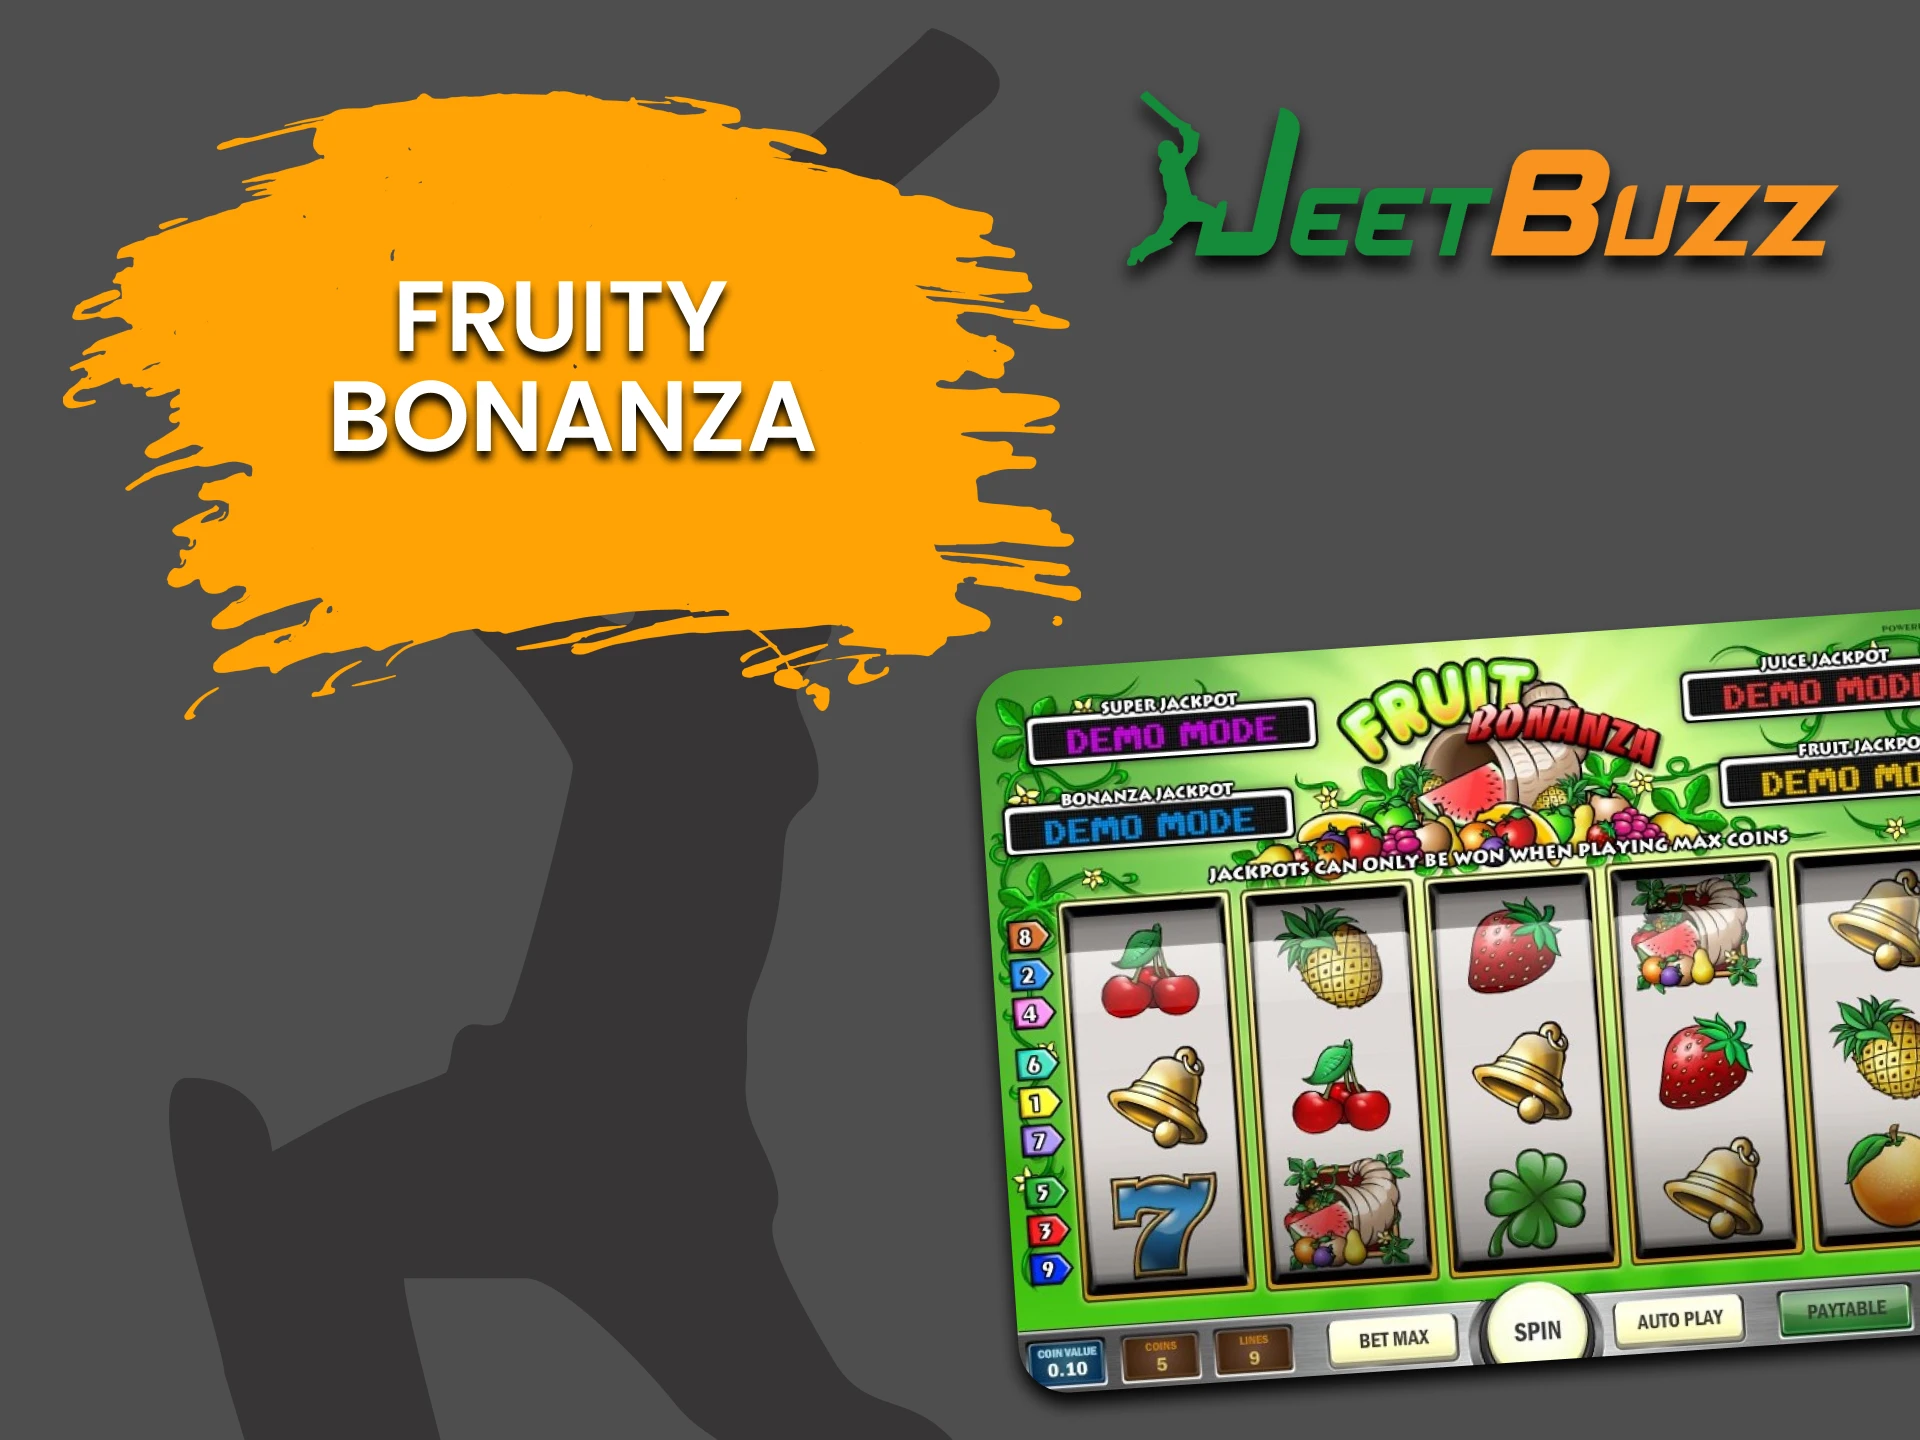 For games on JeetBuzz, choose Fruity Bananza.